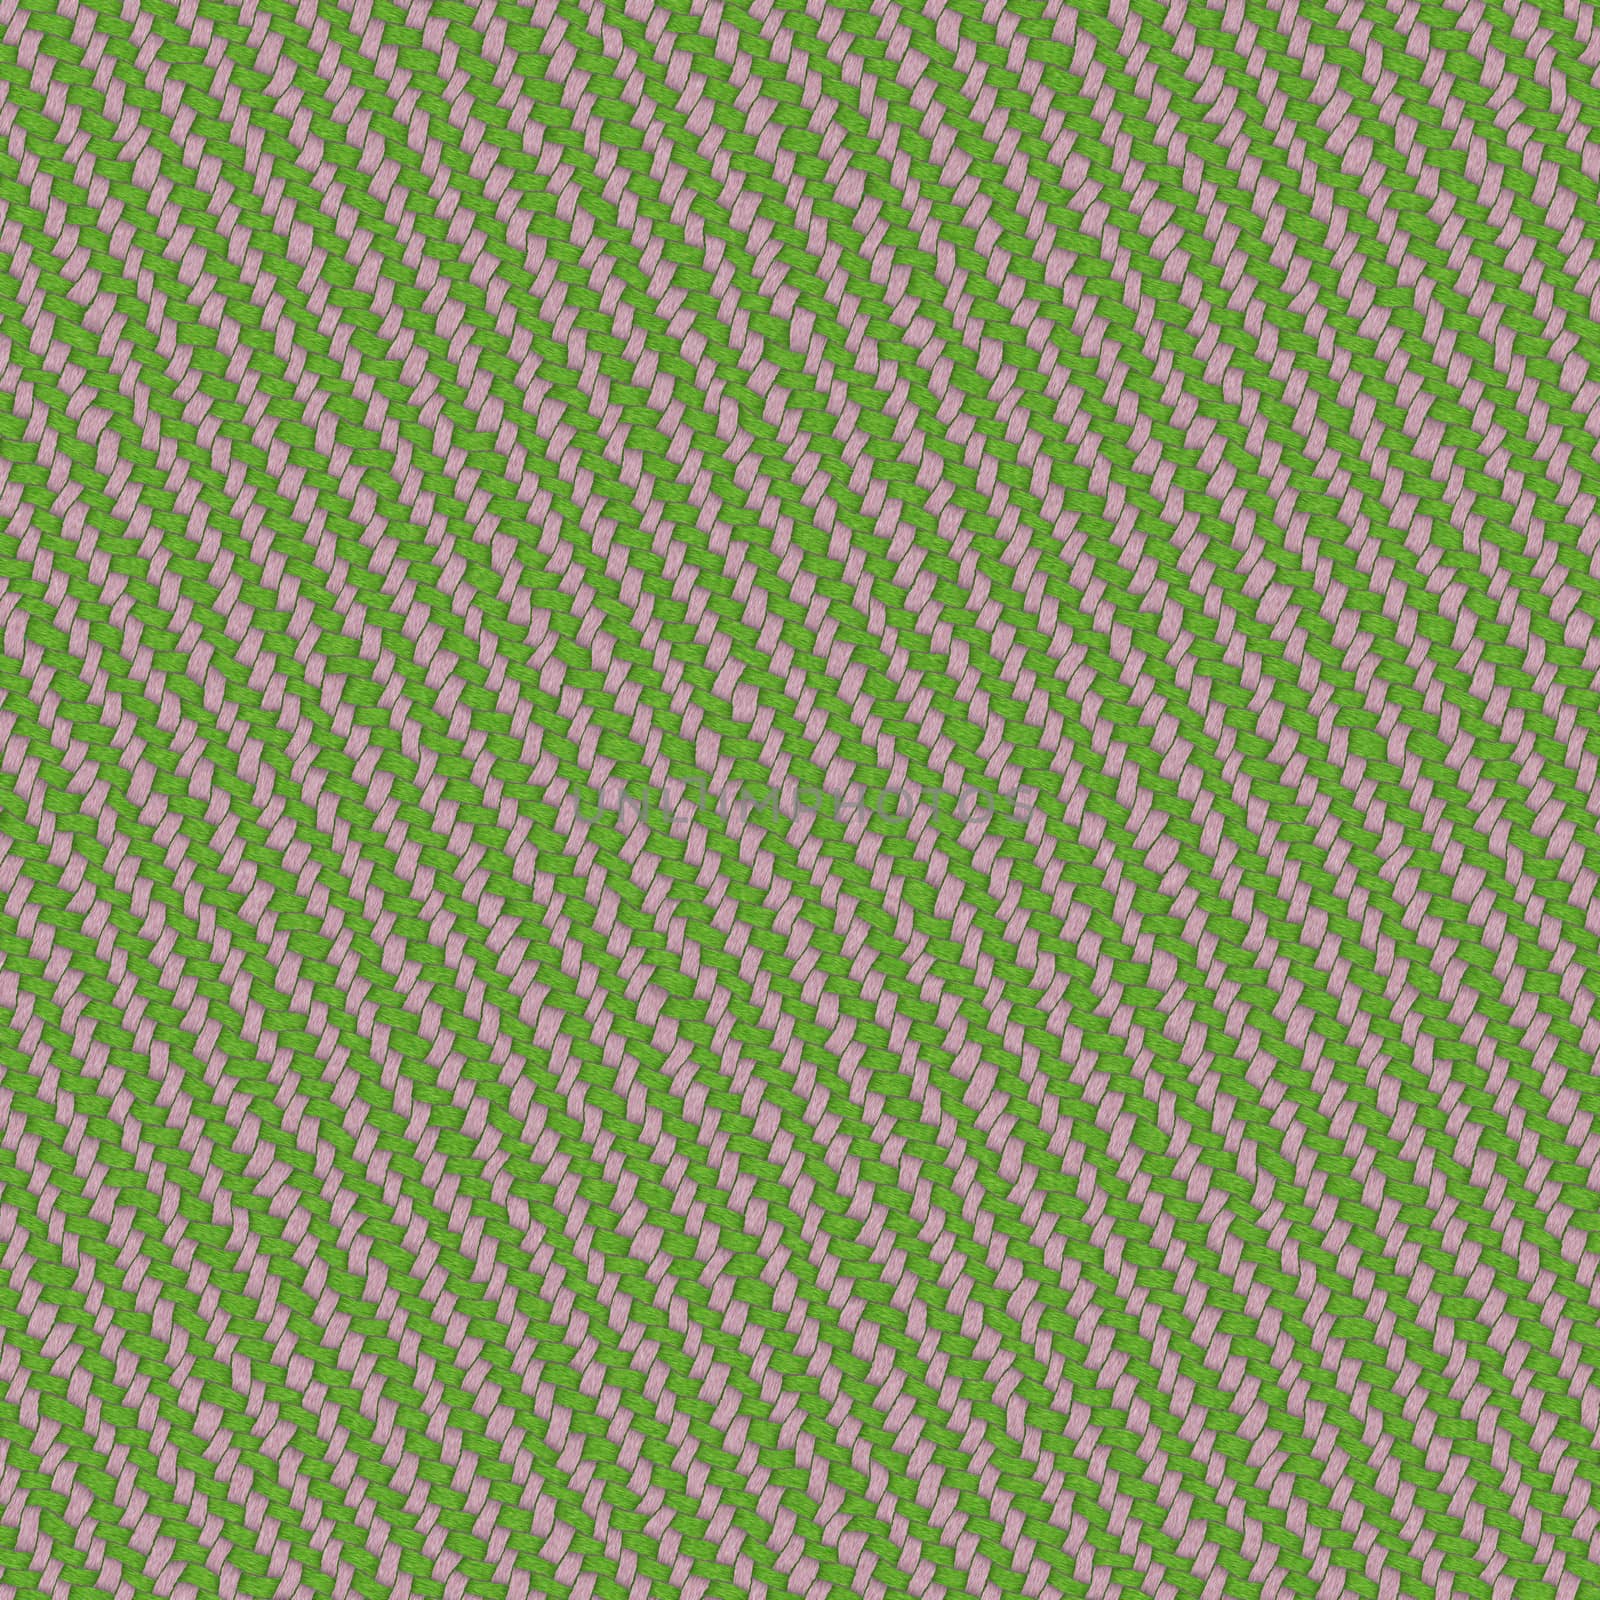 texture of green and pink fabric by sfinks